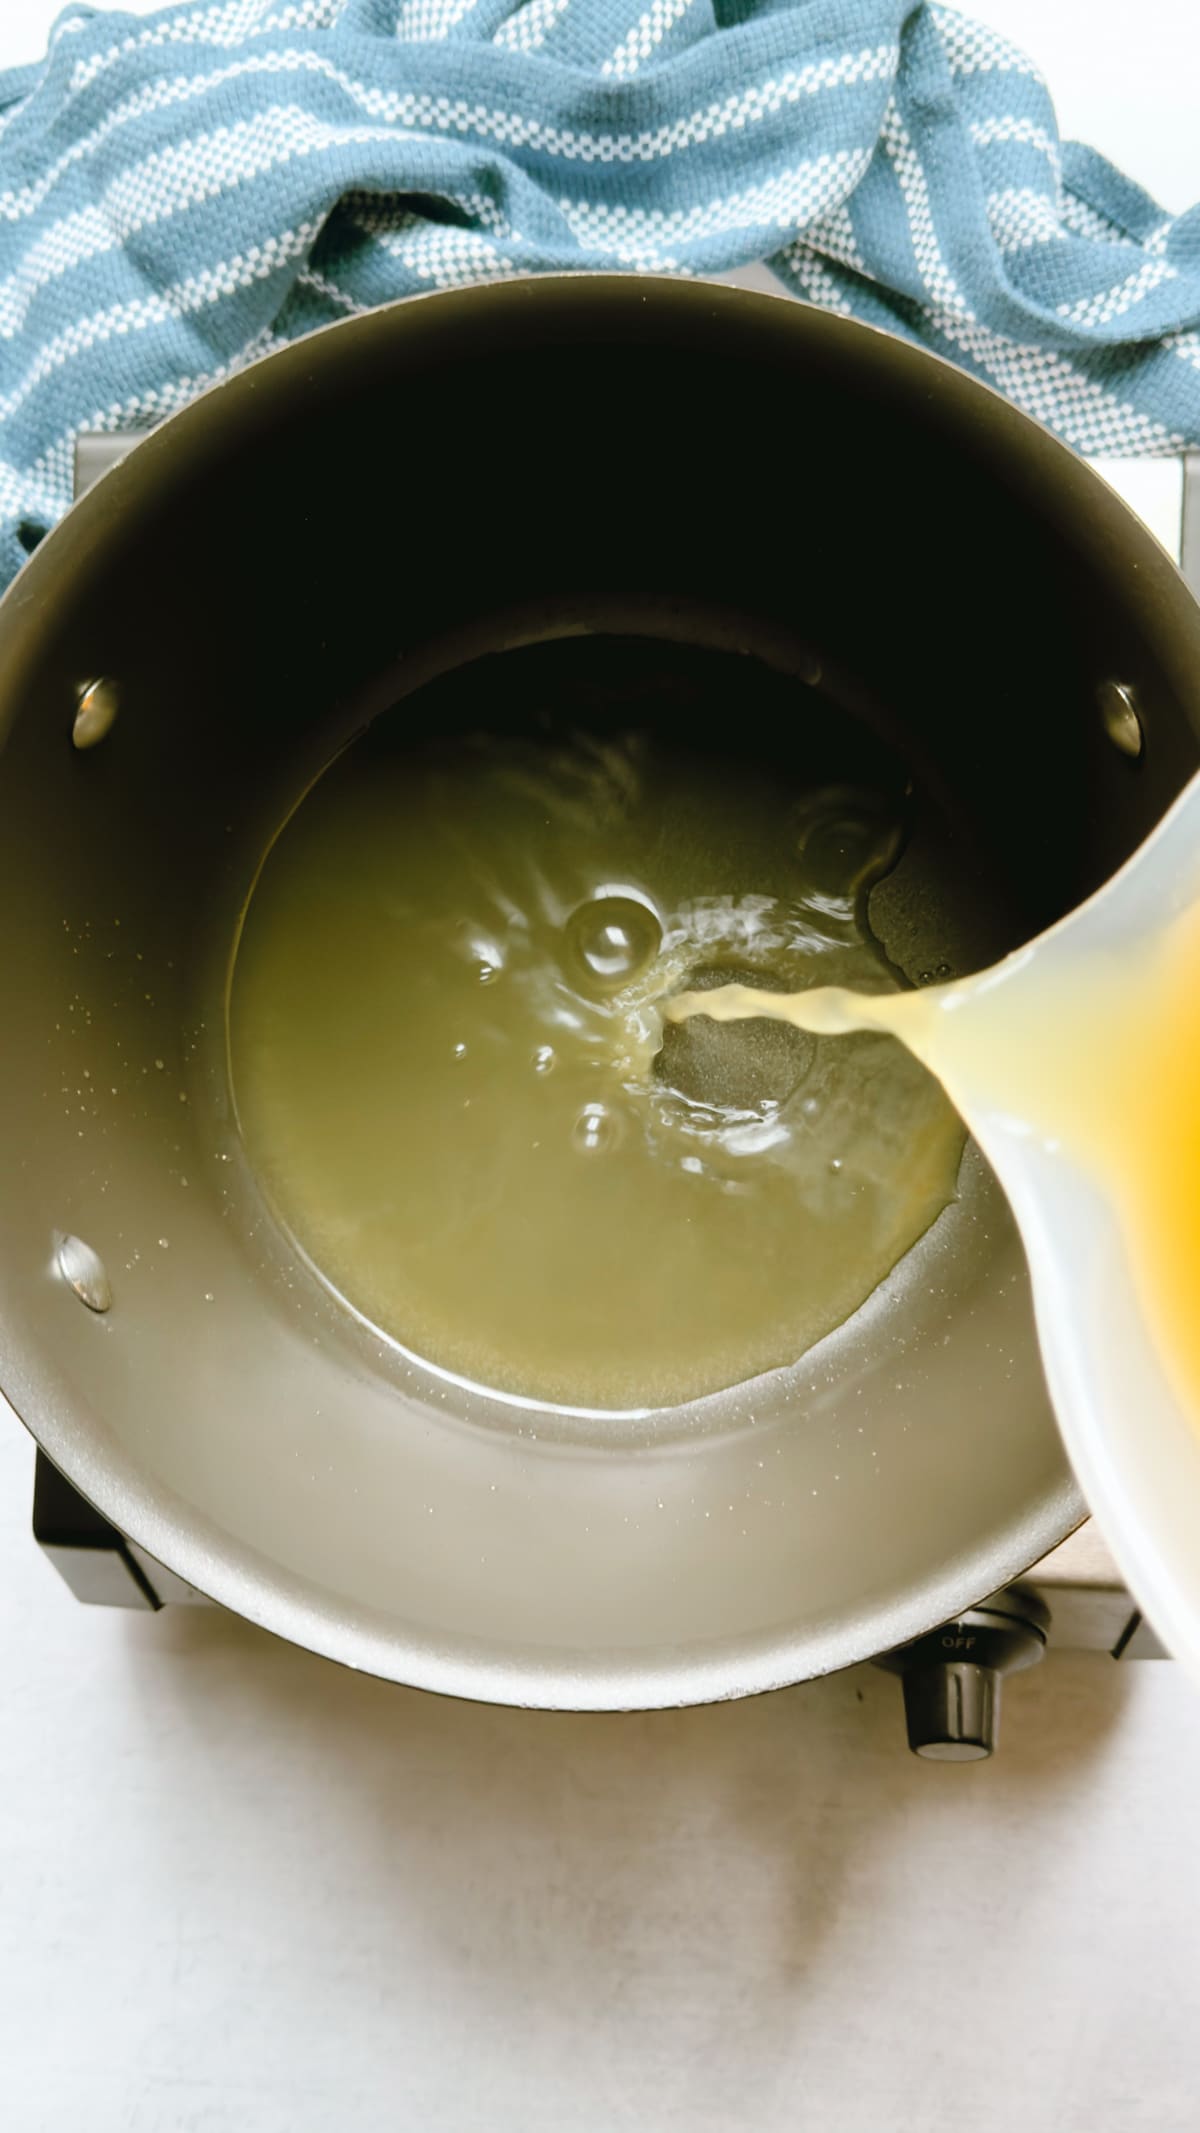 Pouring chicken broth into a pot on top of a gray surface, with a blue napkin on the side.